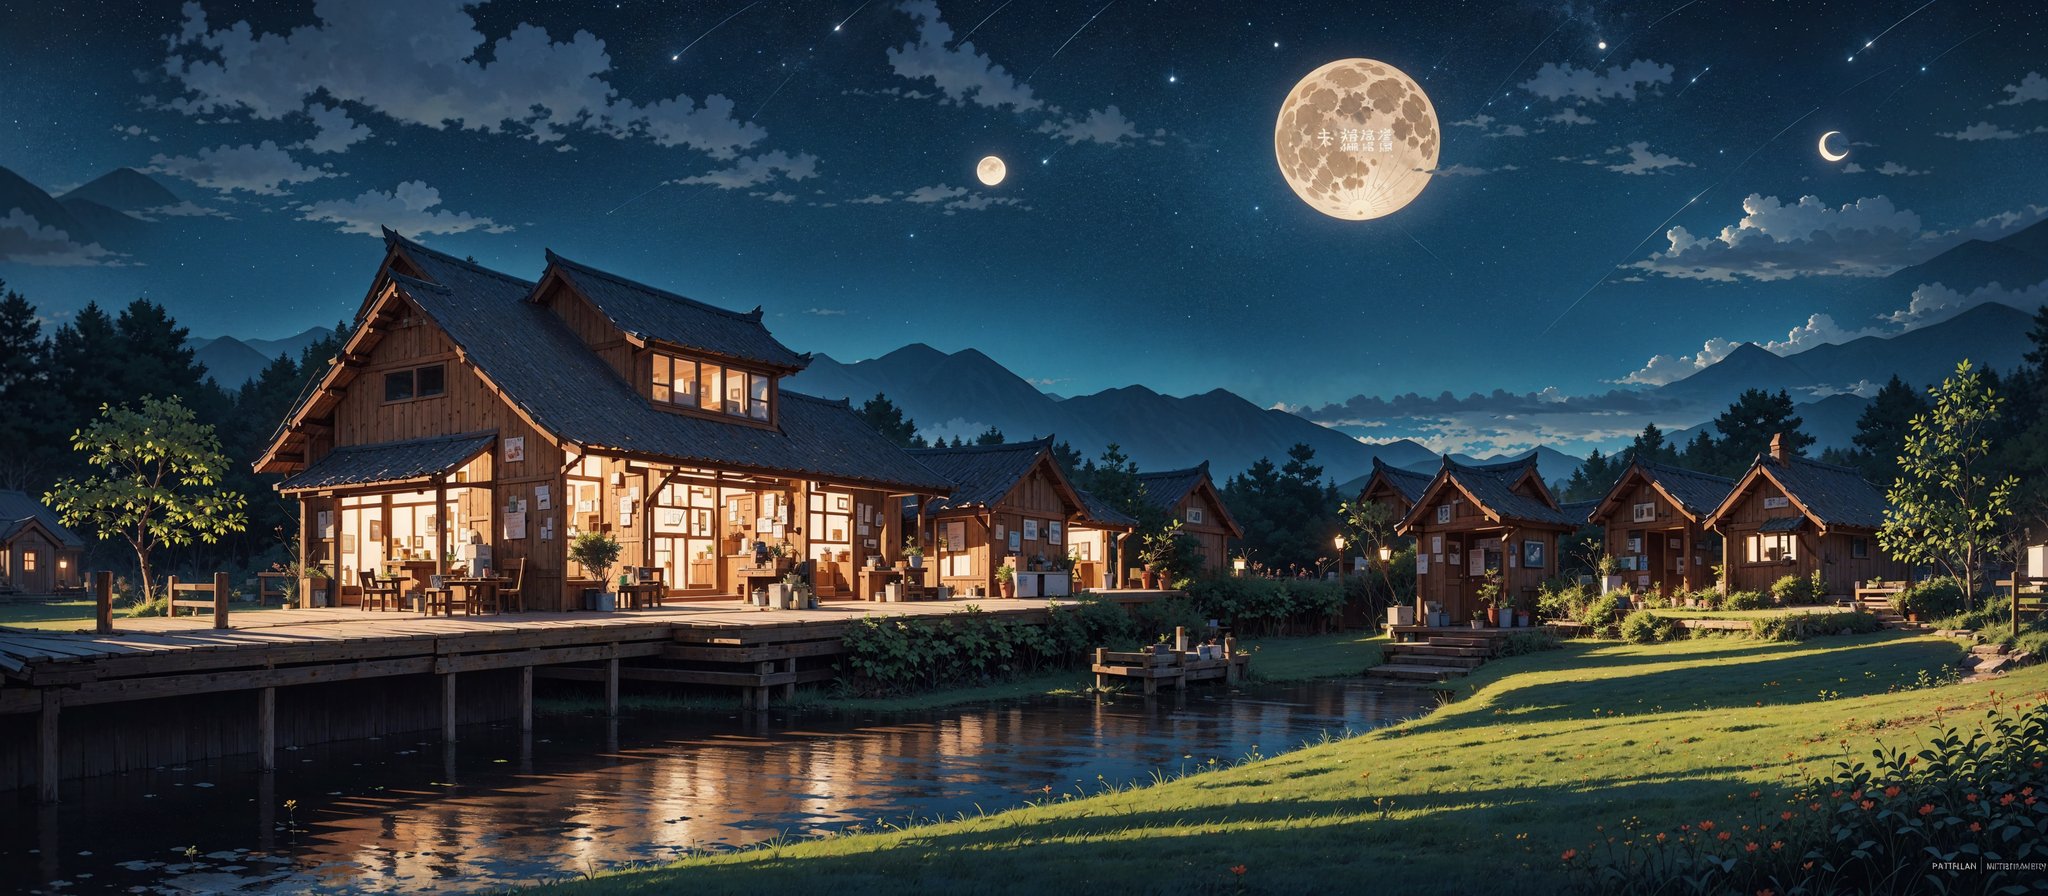 ((beautiful Wallpaper of the view of a field with a traditional small house in it and a person and a shed and river and lake)), ((night)), (((sky full star and a moon:1))), Landscape, Bangsian fantasy, sumatraism, pexels, pinterest, stock photo, shutterstock, picture, behance, tilt shift photo, jigsaw puzzle, ecological art, Cheong Soo Pieng, kouan, regionalism, syunkarow, Solarpunk, Solarpunk, microscopic photo, Tan Ting-pho, environmental art, color field, Yann Arthus-Bertrand, Basawan, Gong'an, Bichitr, Parable, Architectural, horishiki, over-rice, mura-mura, unsplash, Triangulation, Food Art